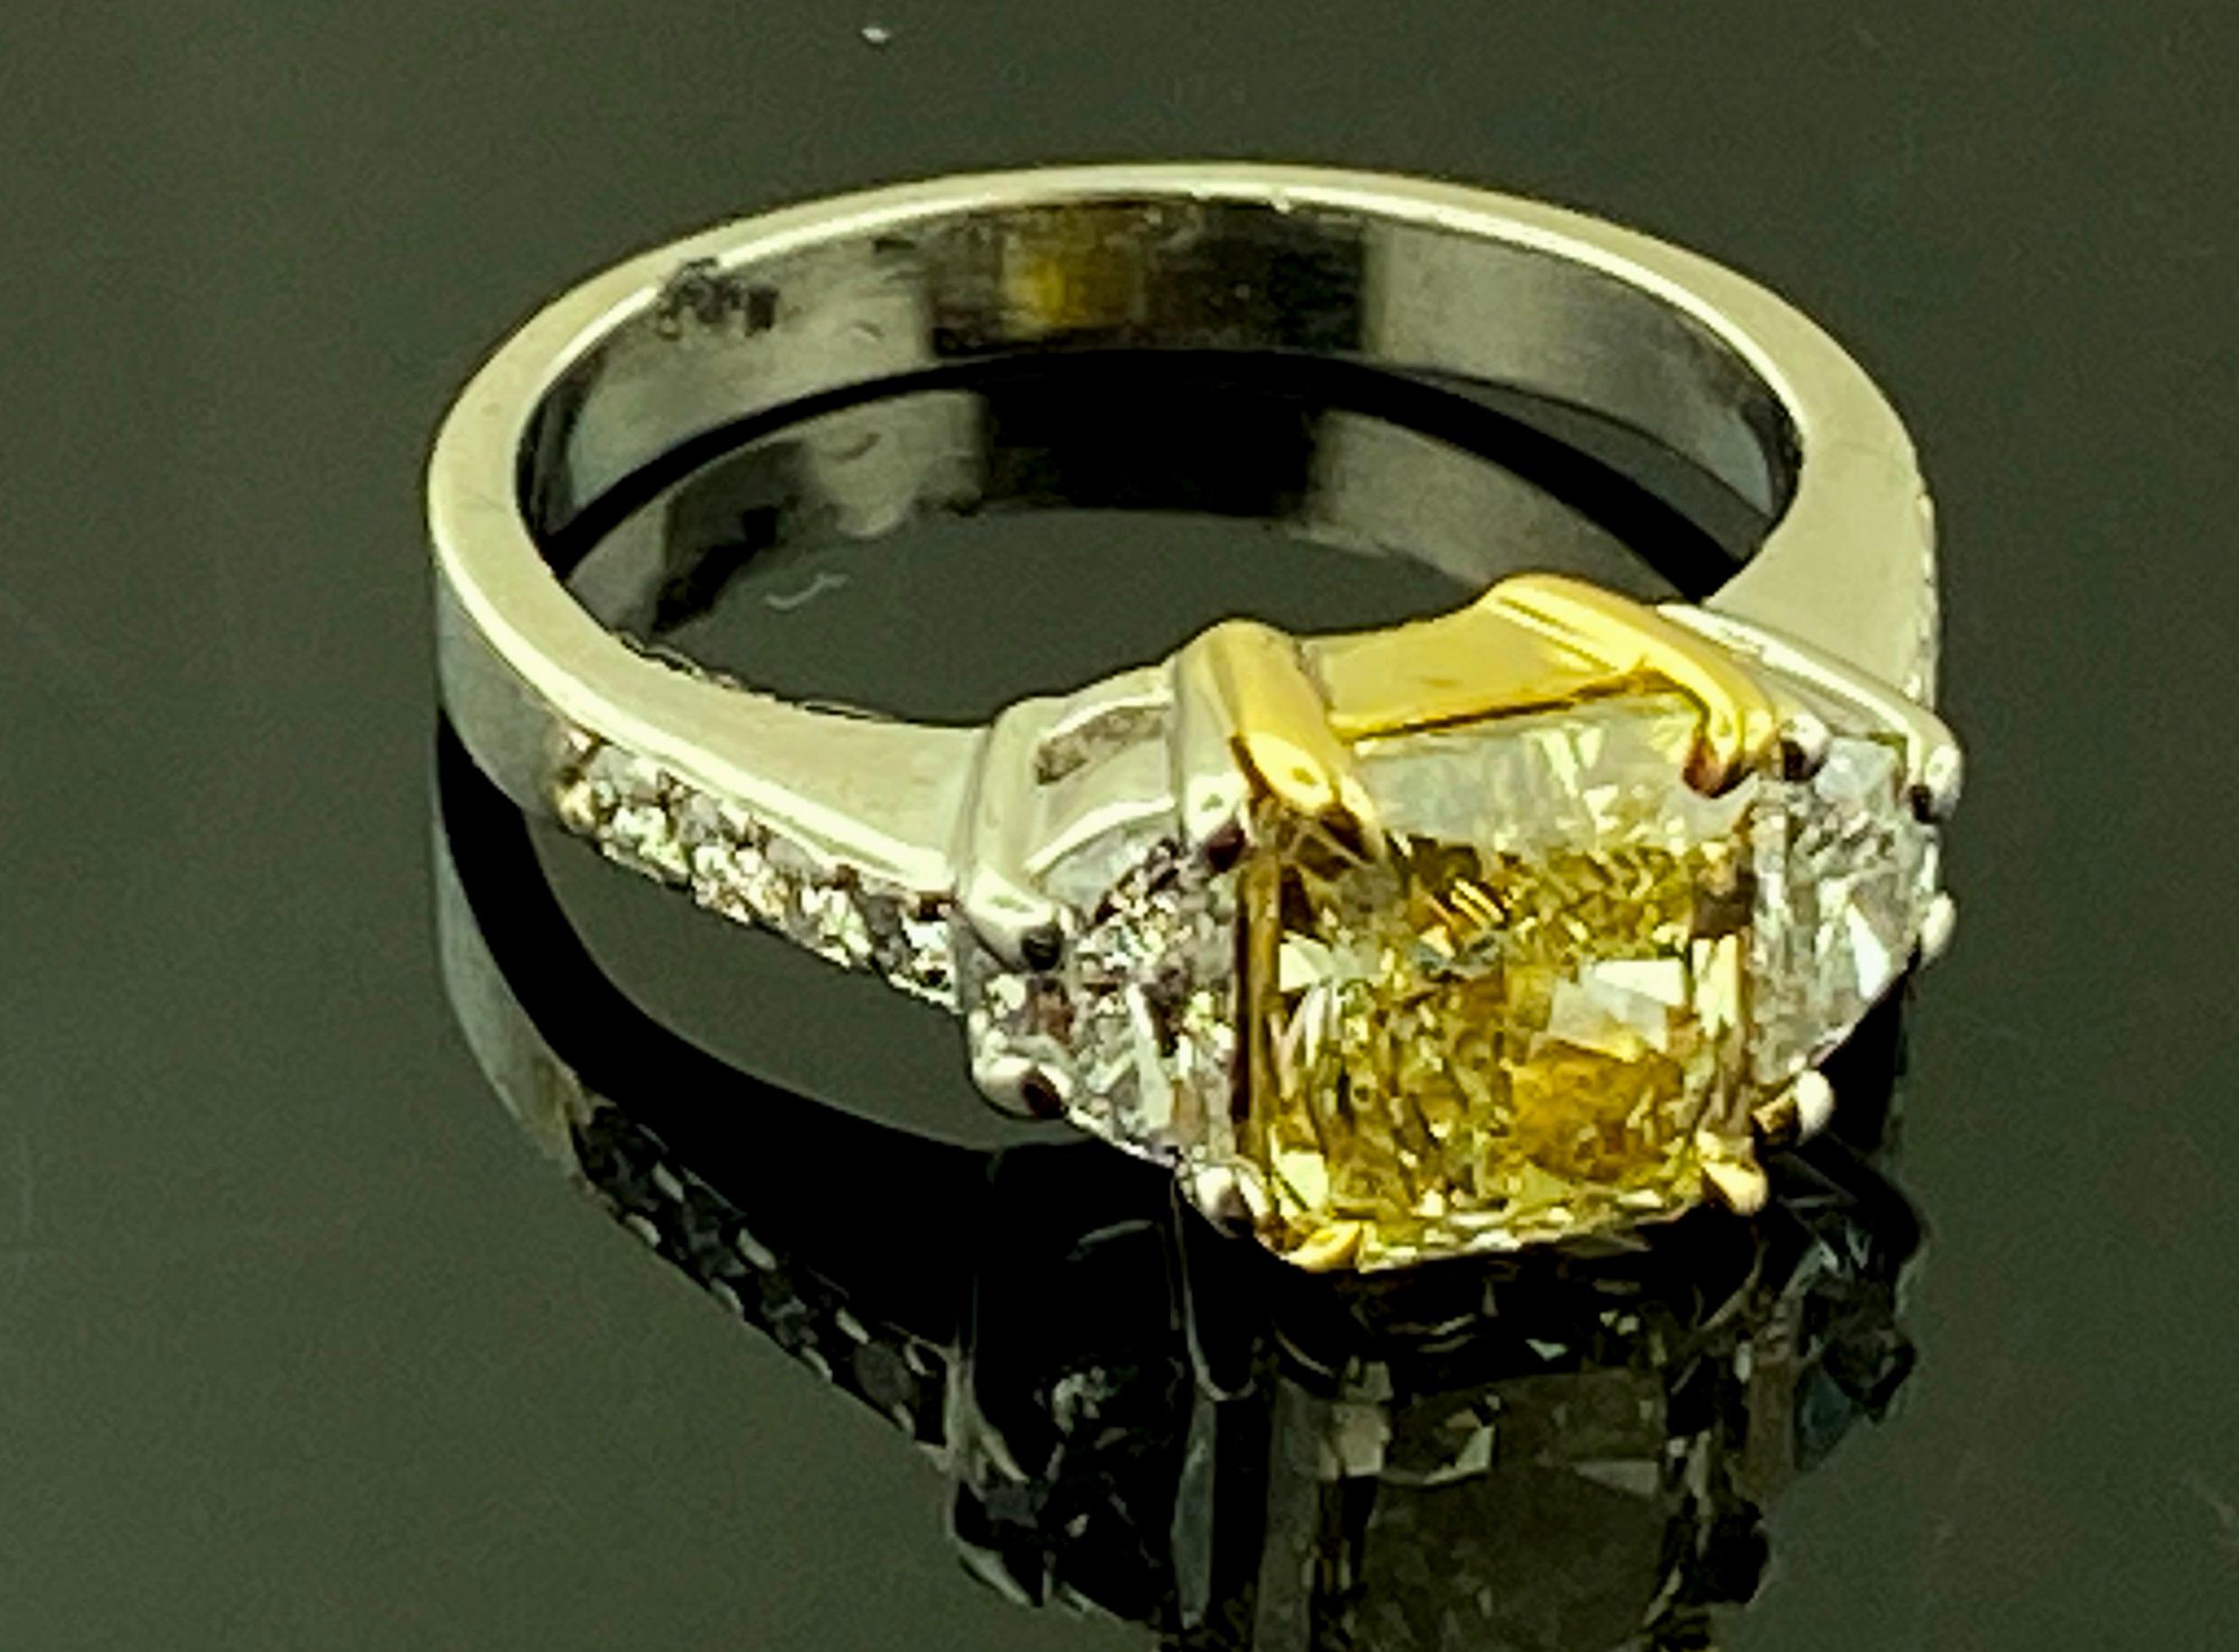 22 KT Yellow Gold & Platinum 1.82 Ct Fancy Yellow Radiant Cut Diamond Ring For Sale 2